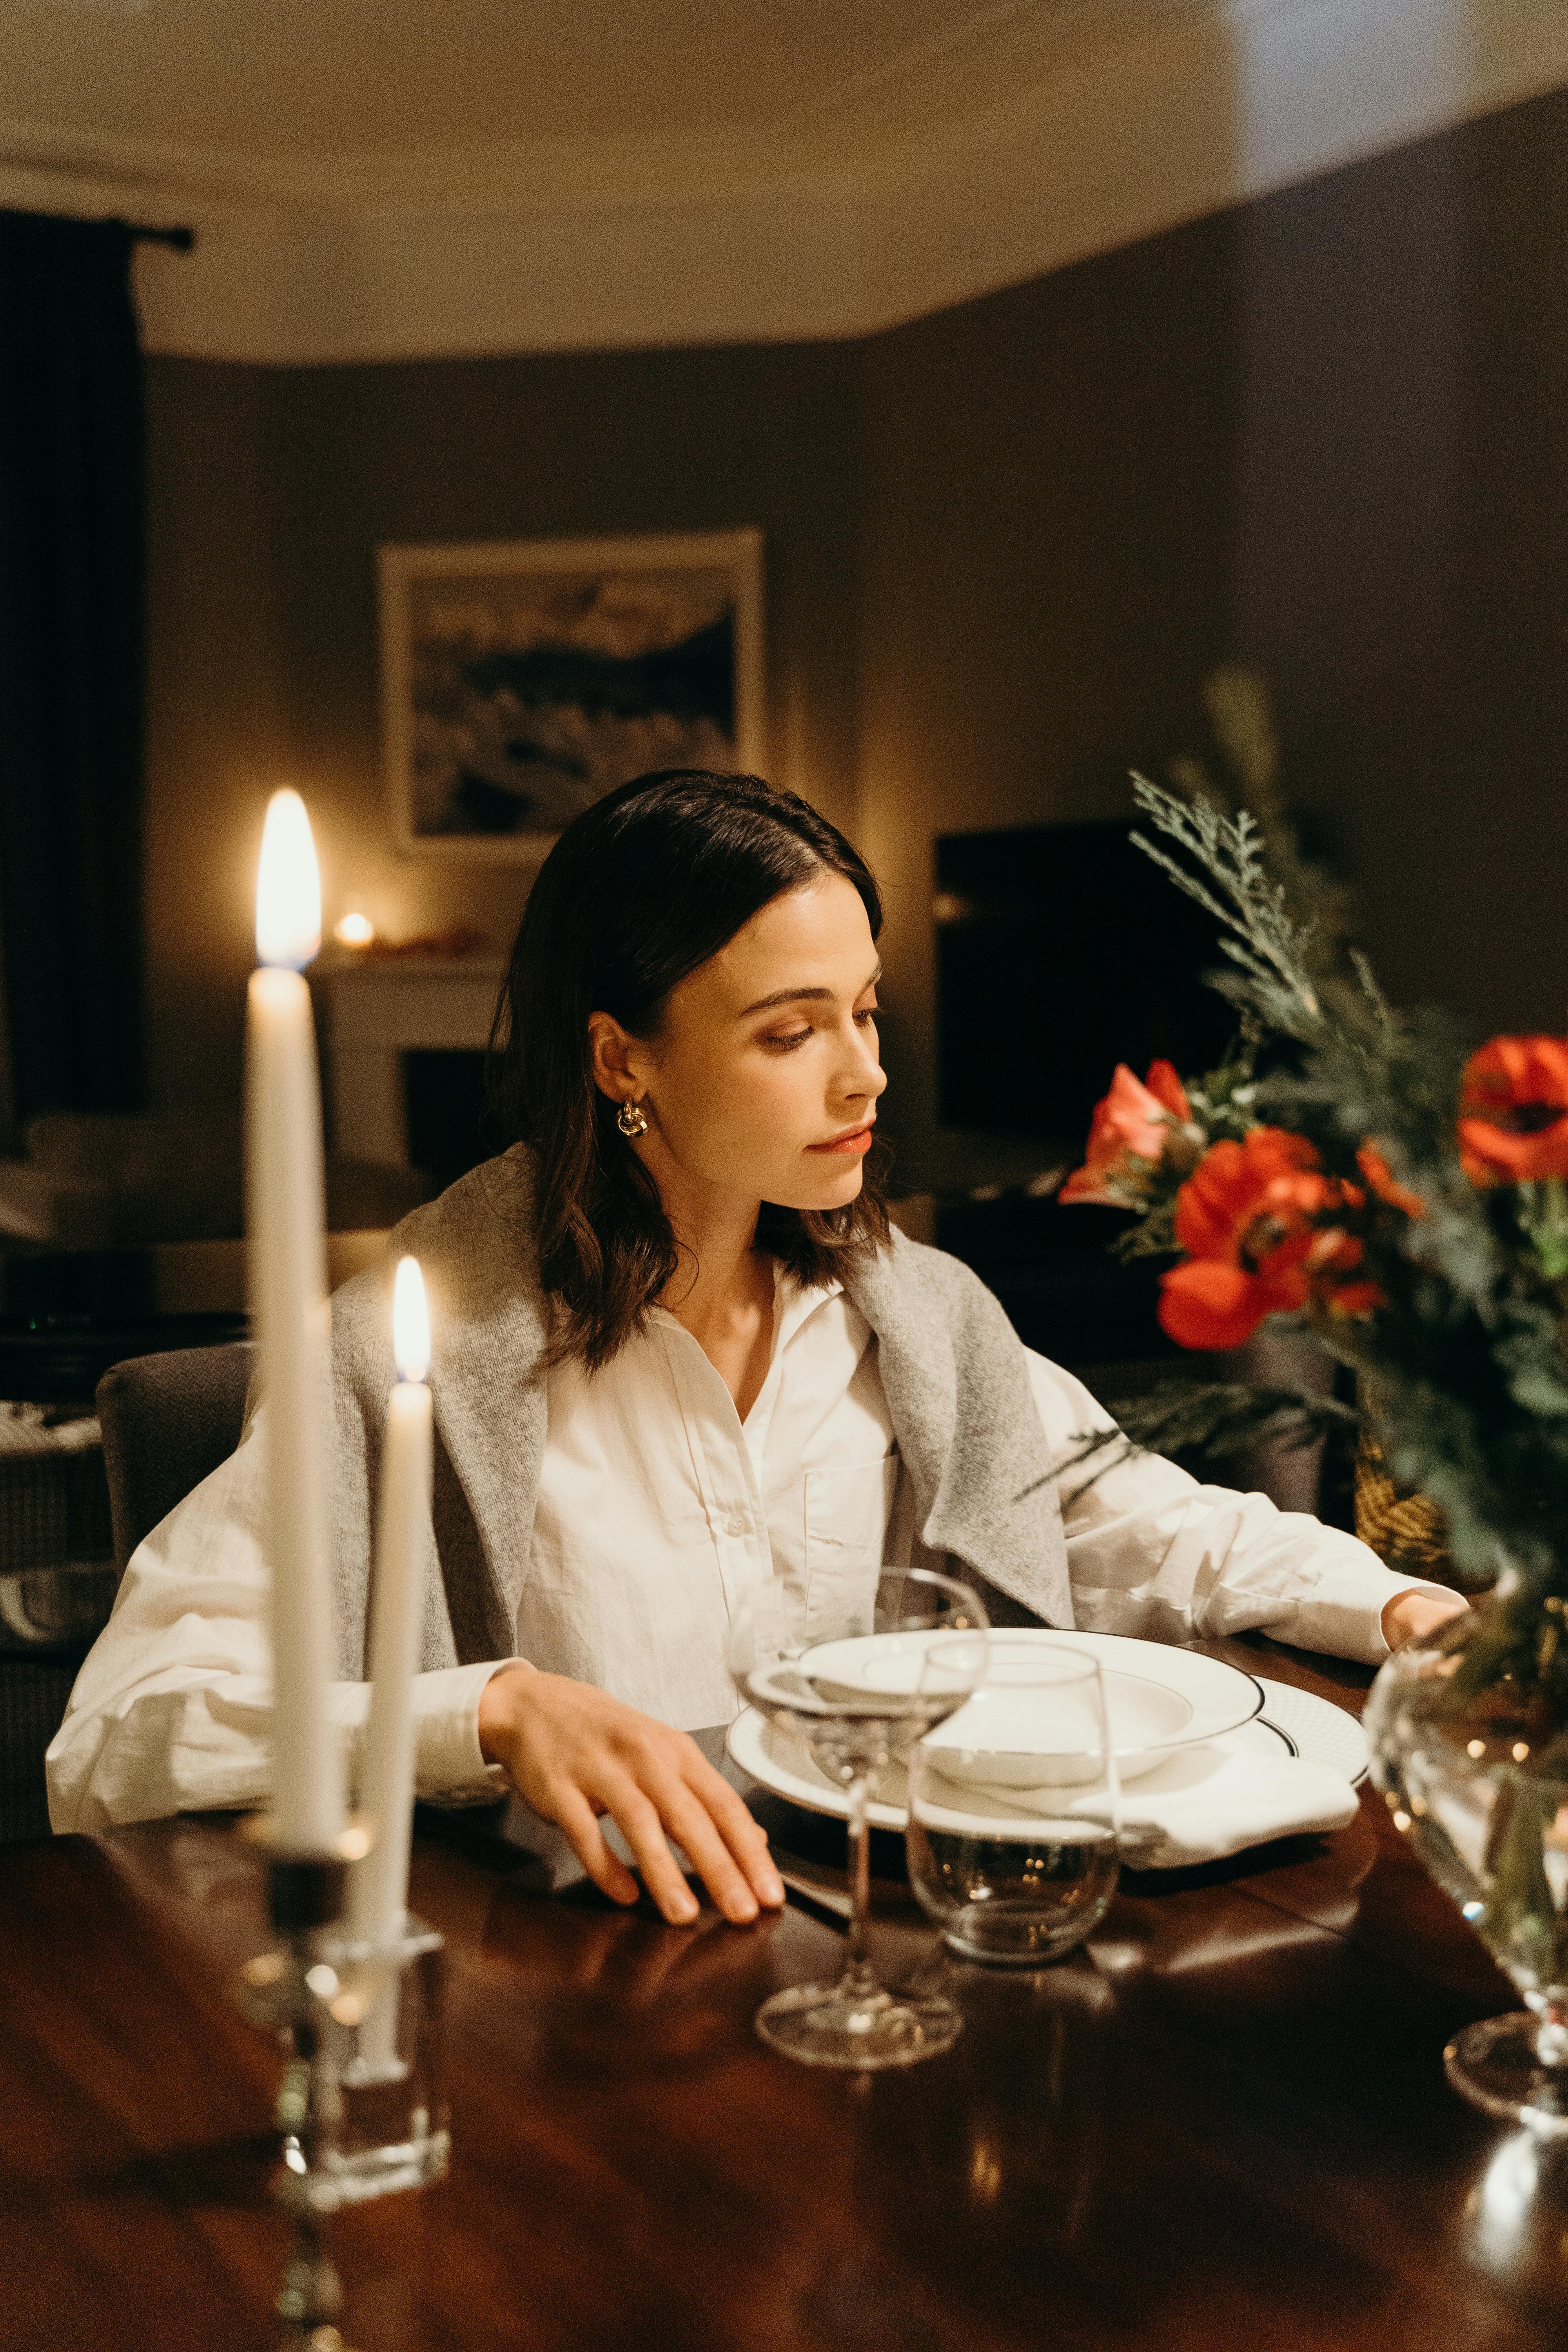 A woman at a table | Source: Pexels